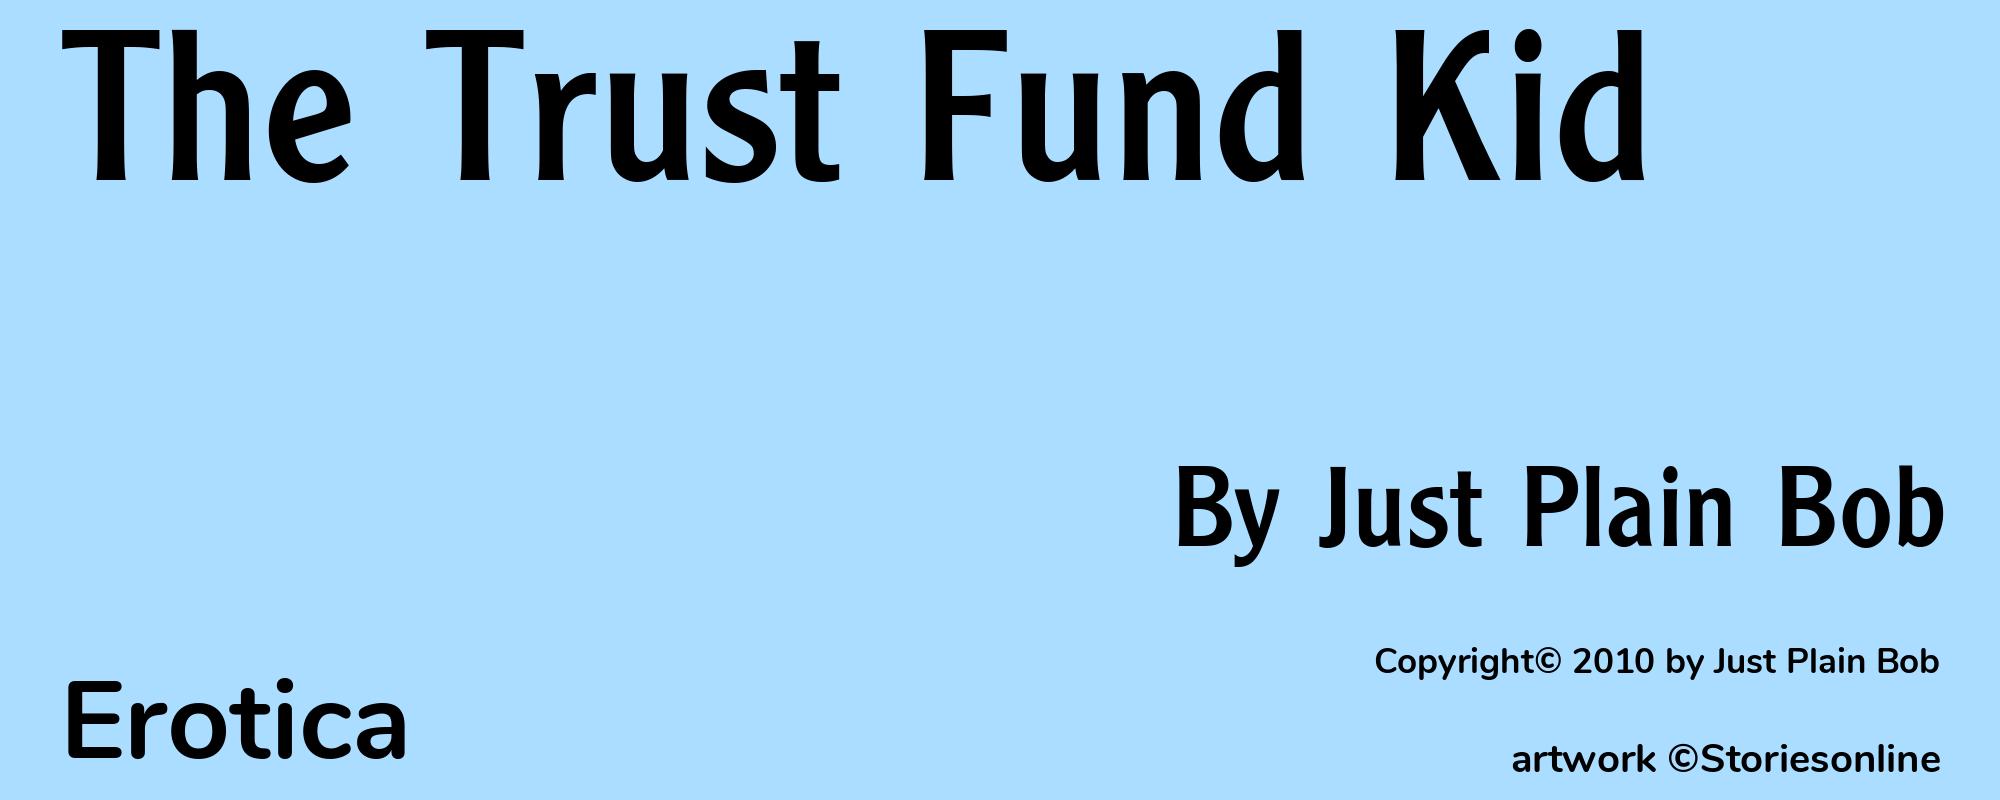 The Trust Fund Kid - Cover